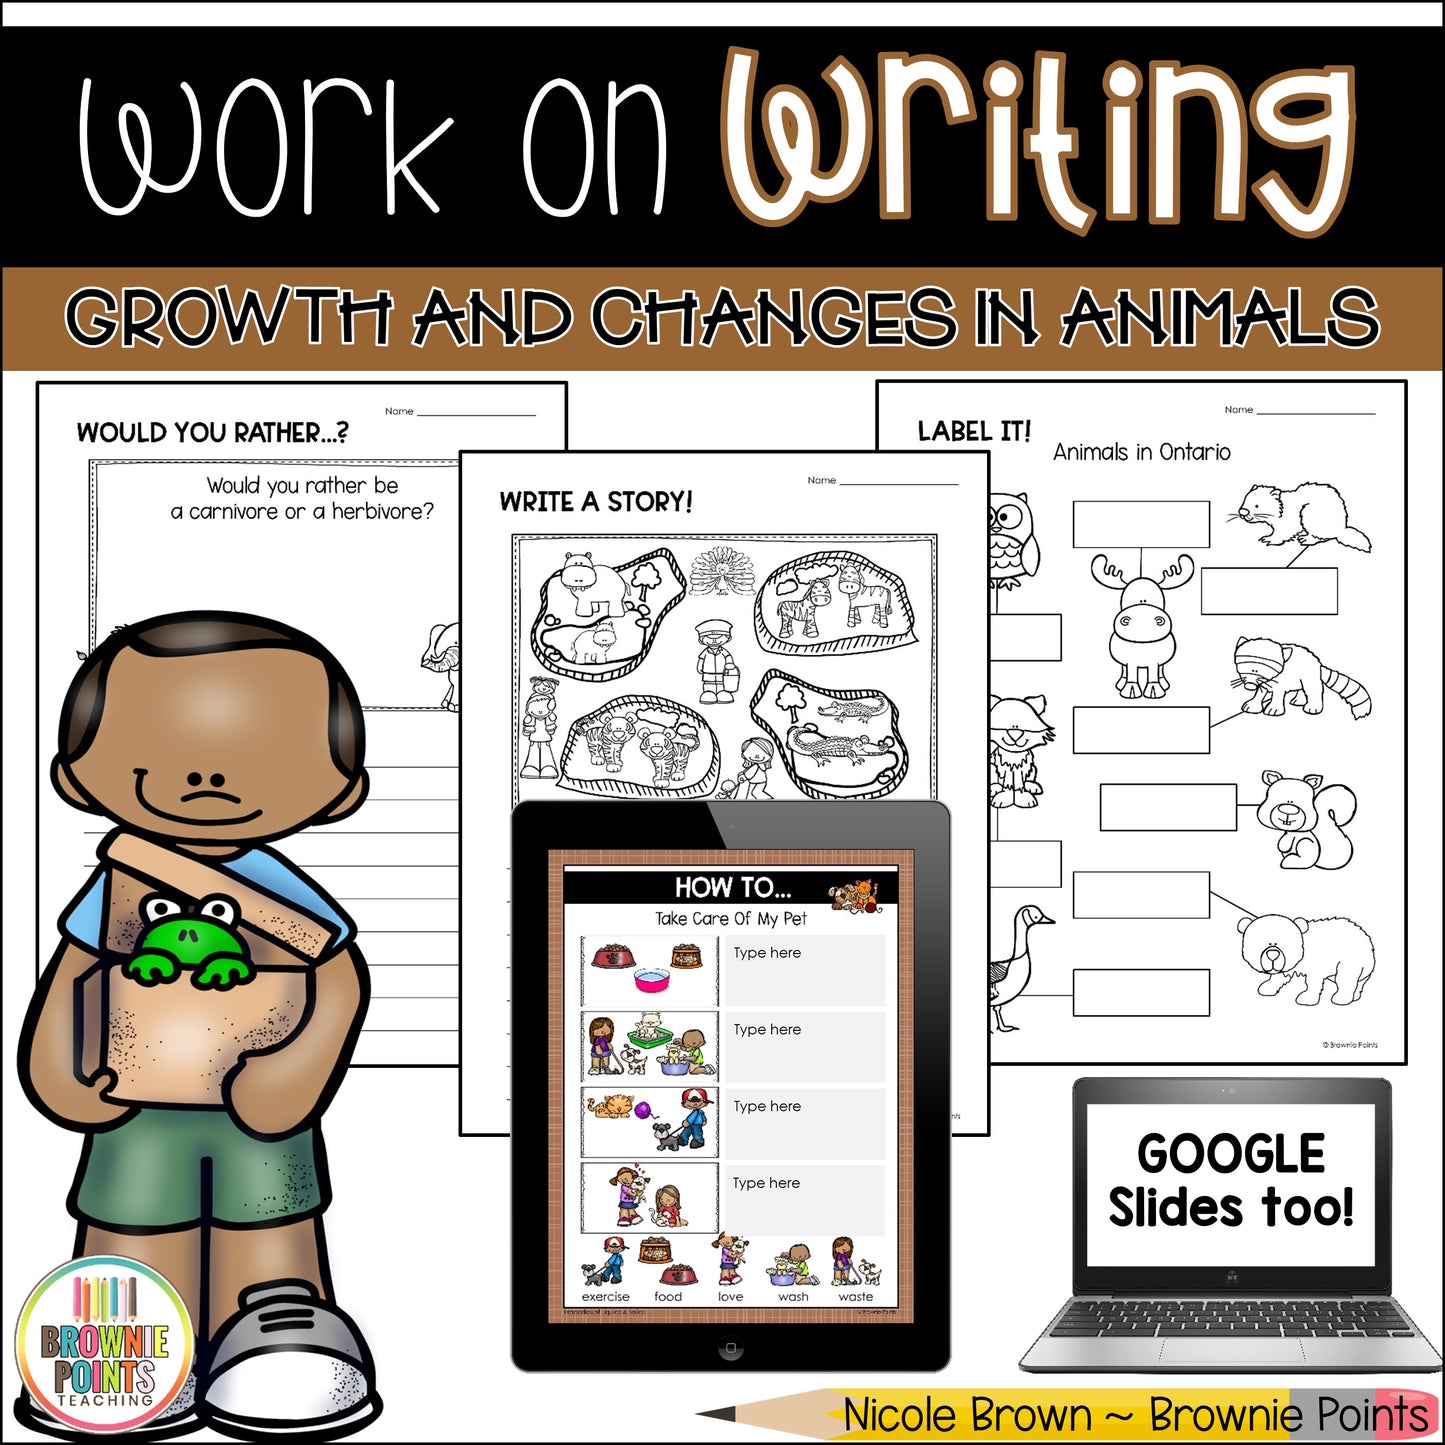 Work on Writing - Growth and Changes in Animals